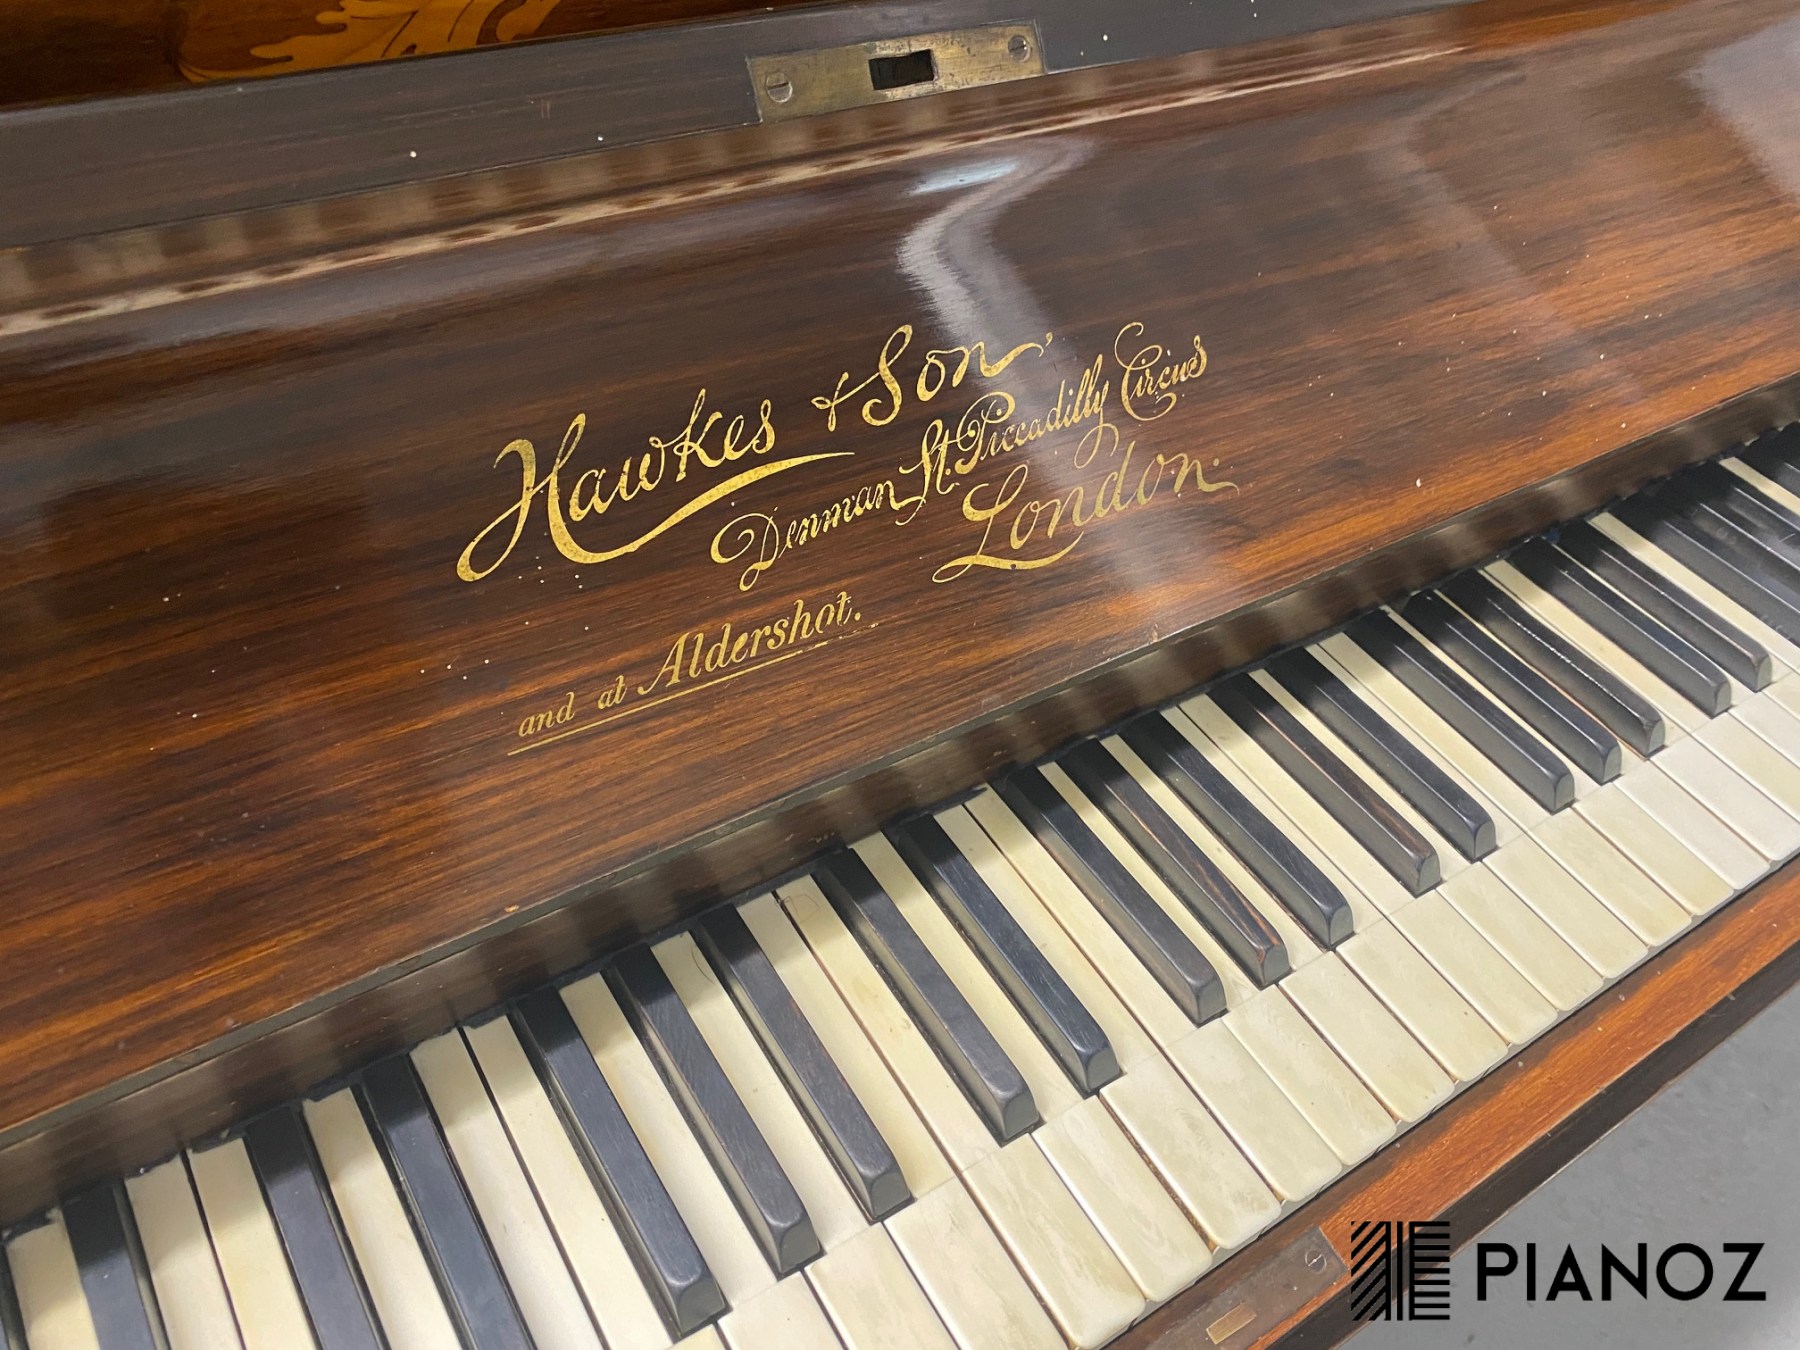 Hawkes ‘Living’ The Rowan Tree Upright Piano piano for sale in UK